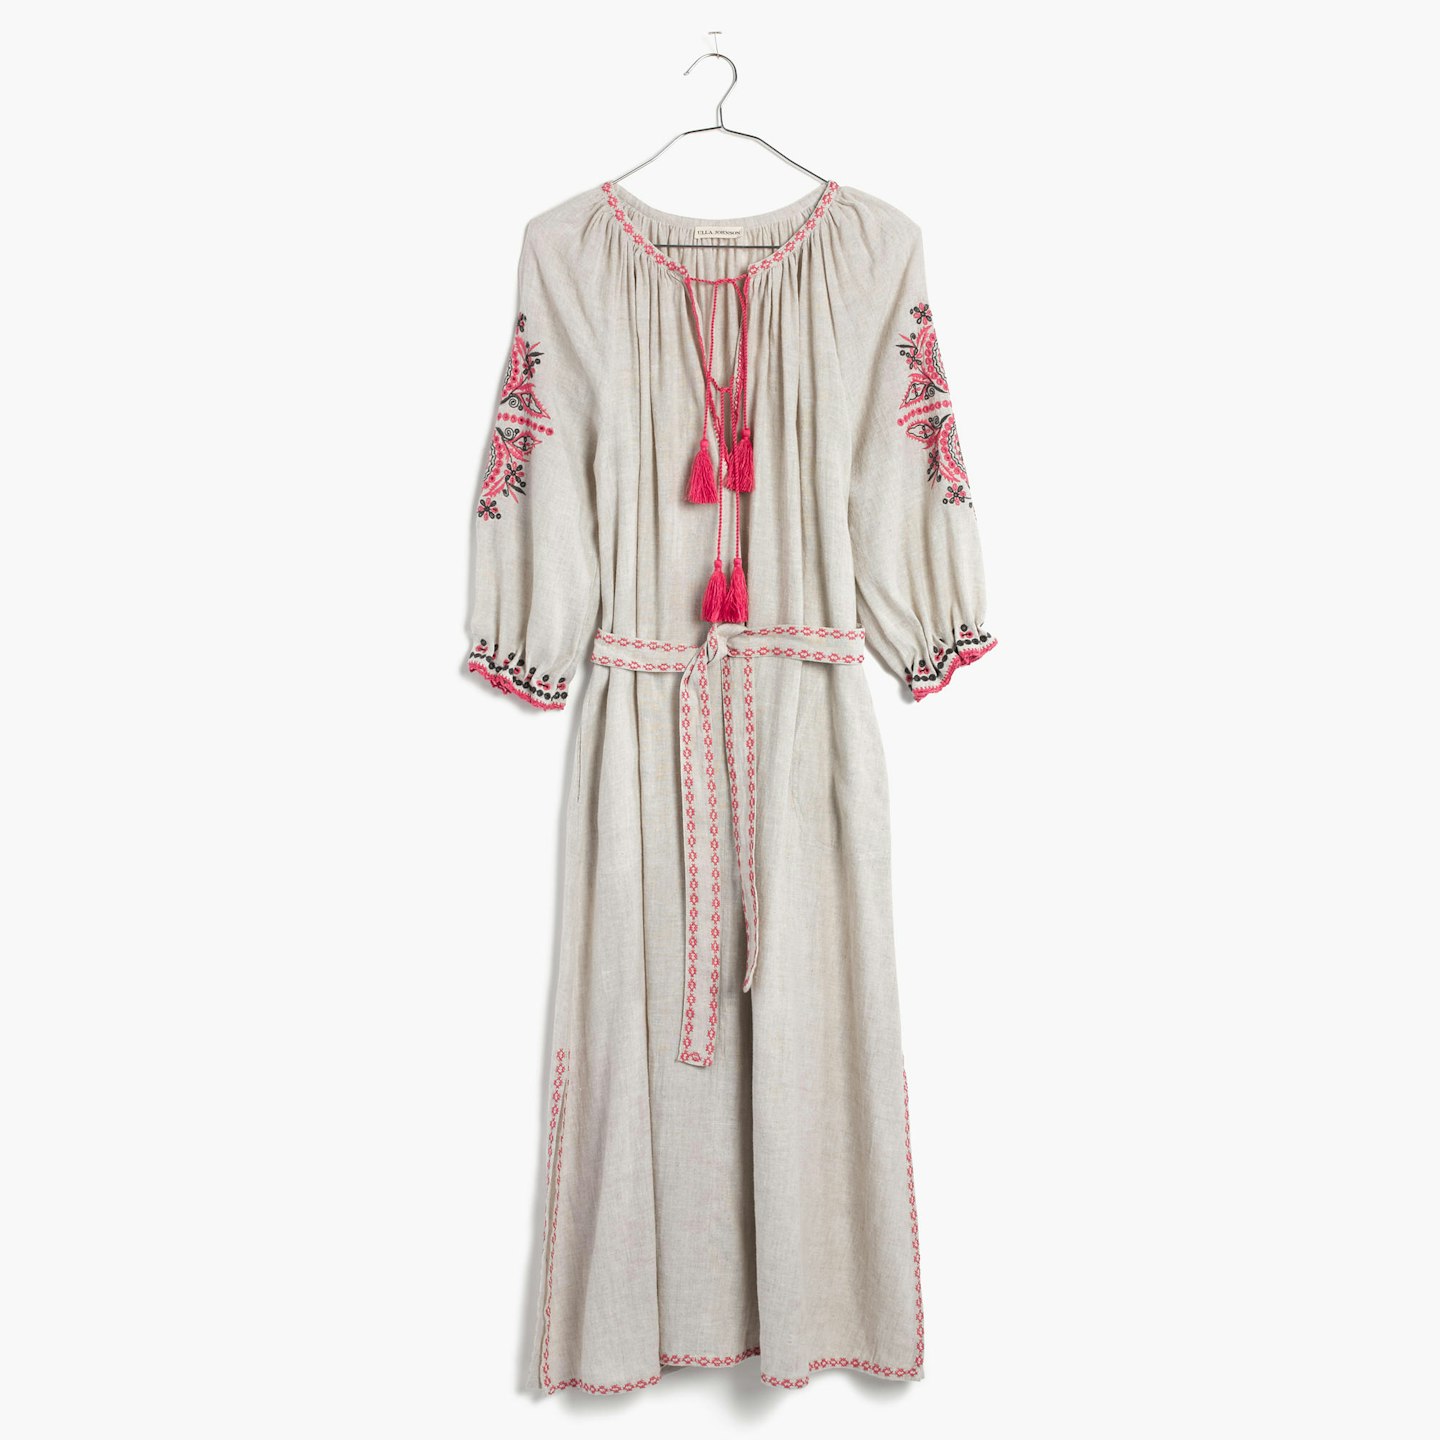 Boho Style Embroidered Midi Dress, £410.65, [Madewell](https://www.madewell.com/uk/madewell_category/AllProducts/PRD~E8987/E8987.jsp?Nbrd=M&Nloc=en_GB&Nrpp=48&Npge=1&Ntrm=midi&isSaleItem=false&color_name=FLAX%20PINK&isFromSearch=true&isNewSearch=true&hash=row2)